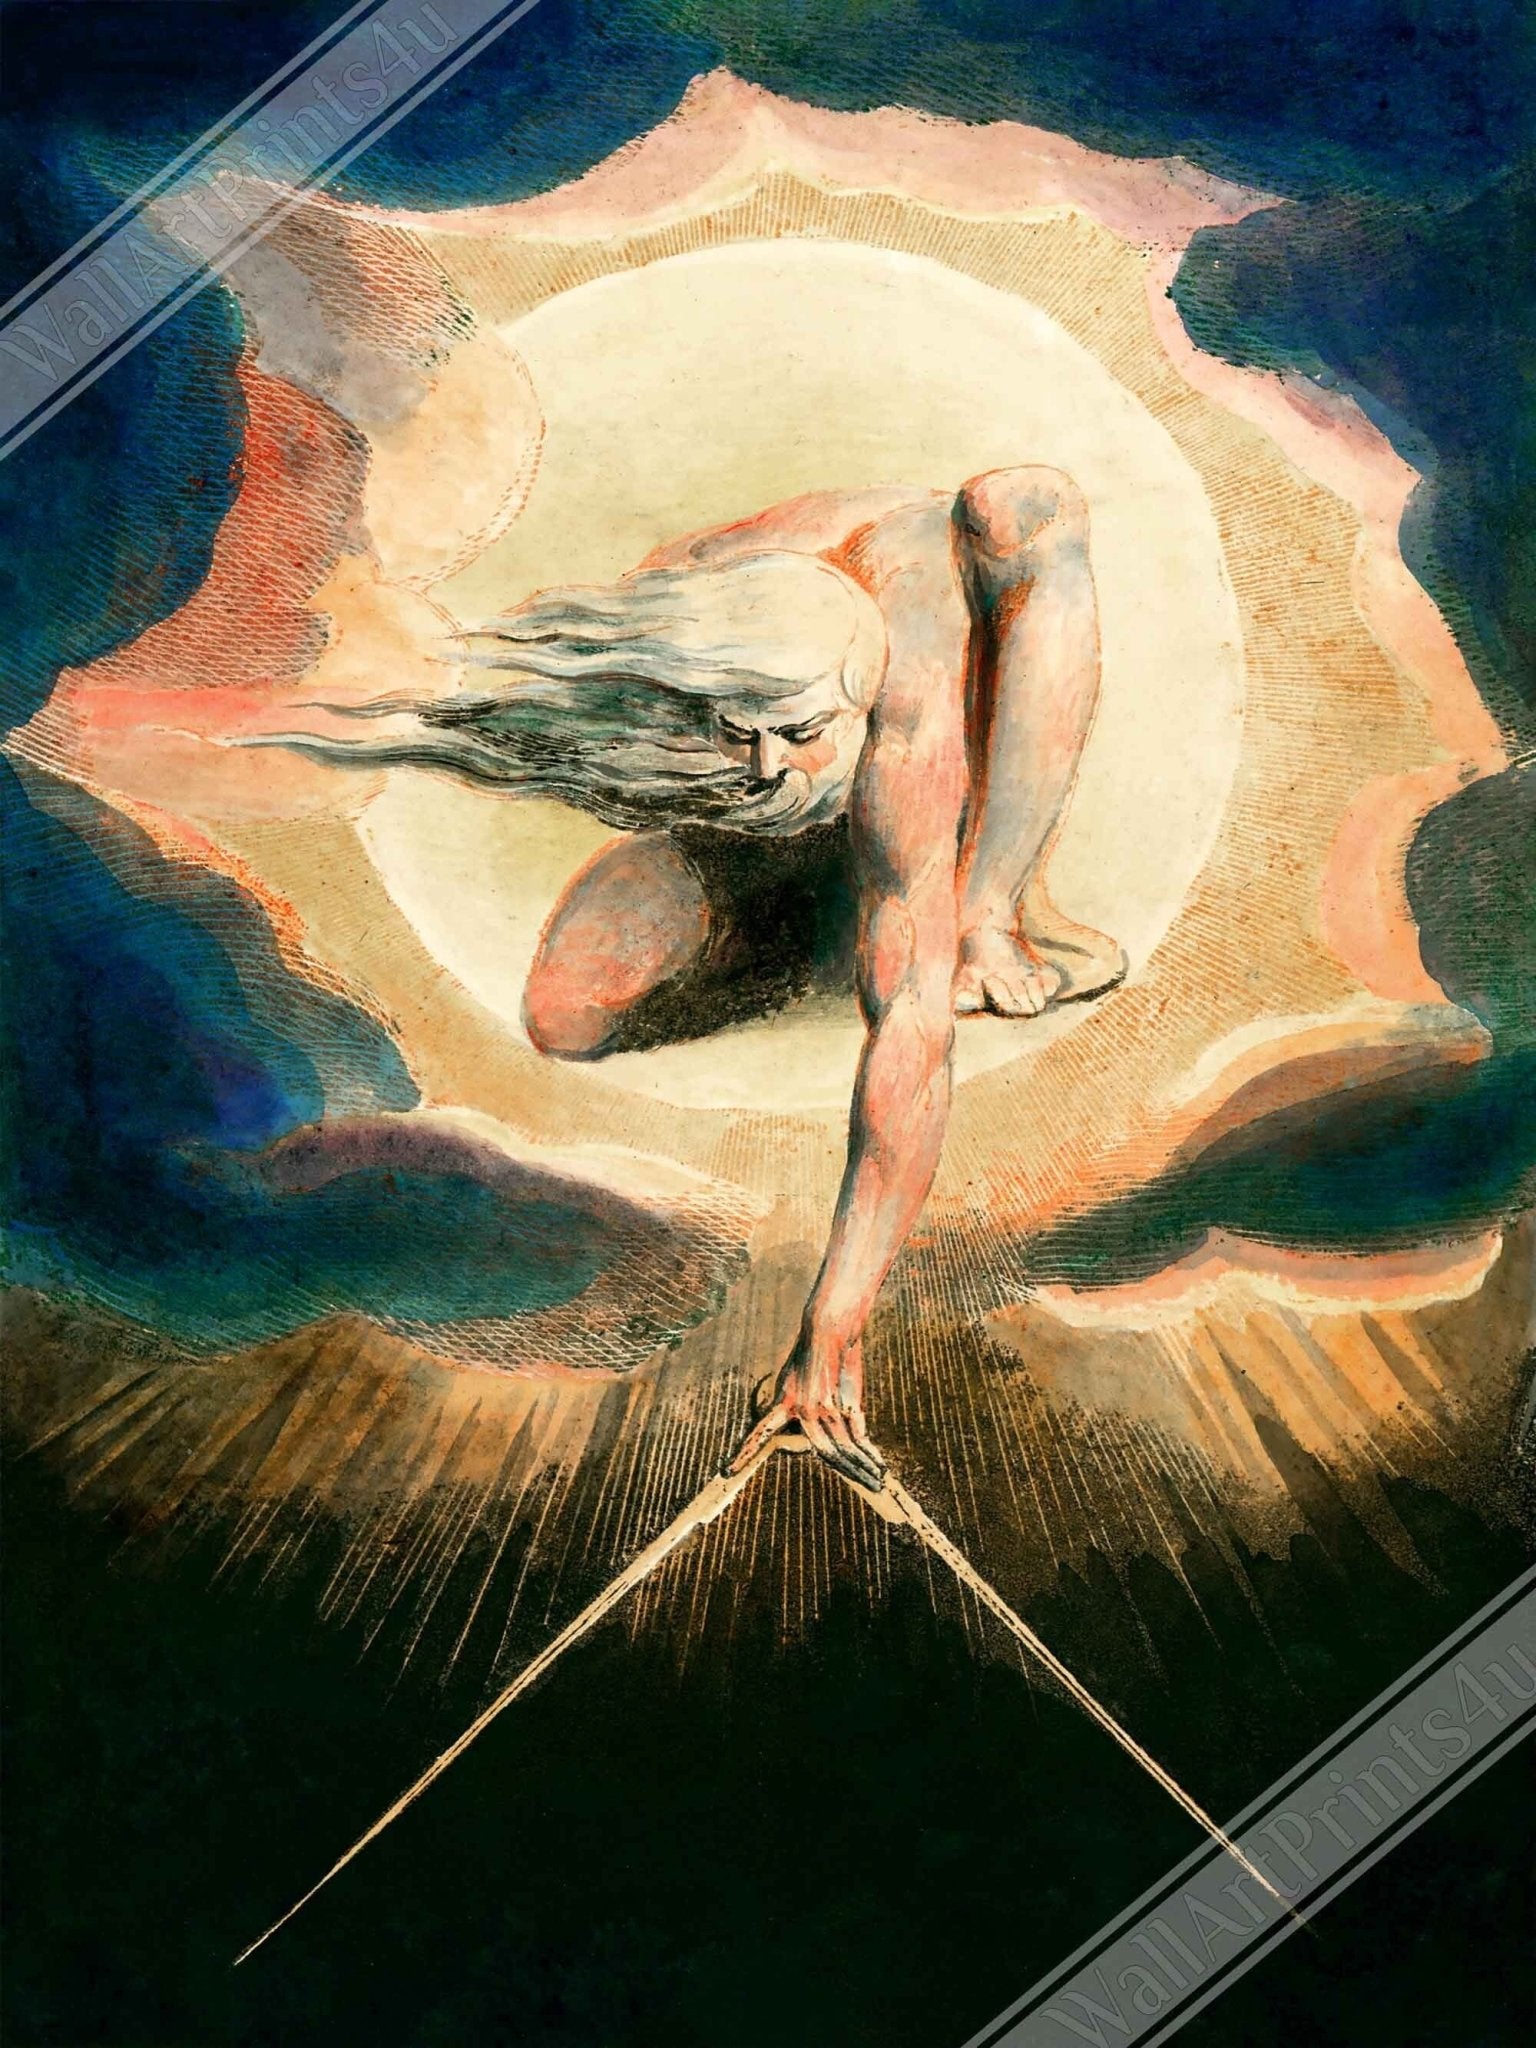 William Blake Poster, Ancient Of Days - William Blake Print - Urizen With Compass Imposes Rational Order - WallArtPrints4U